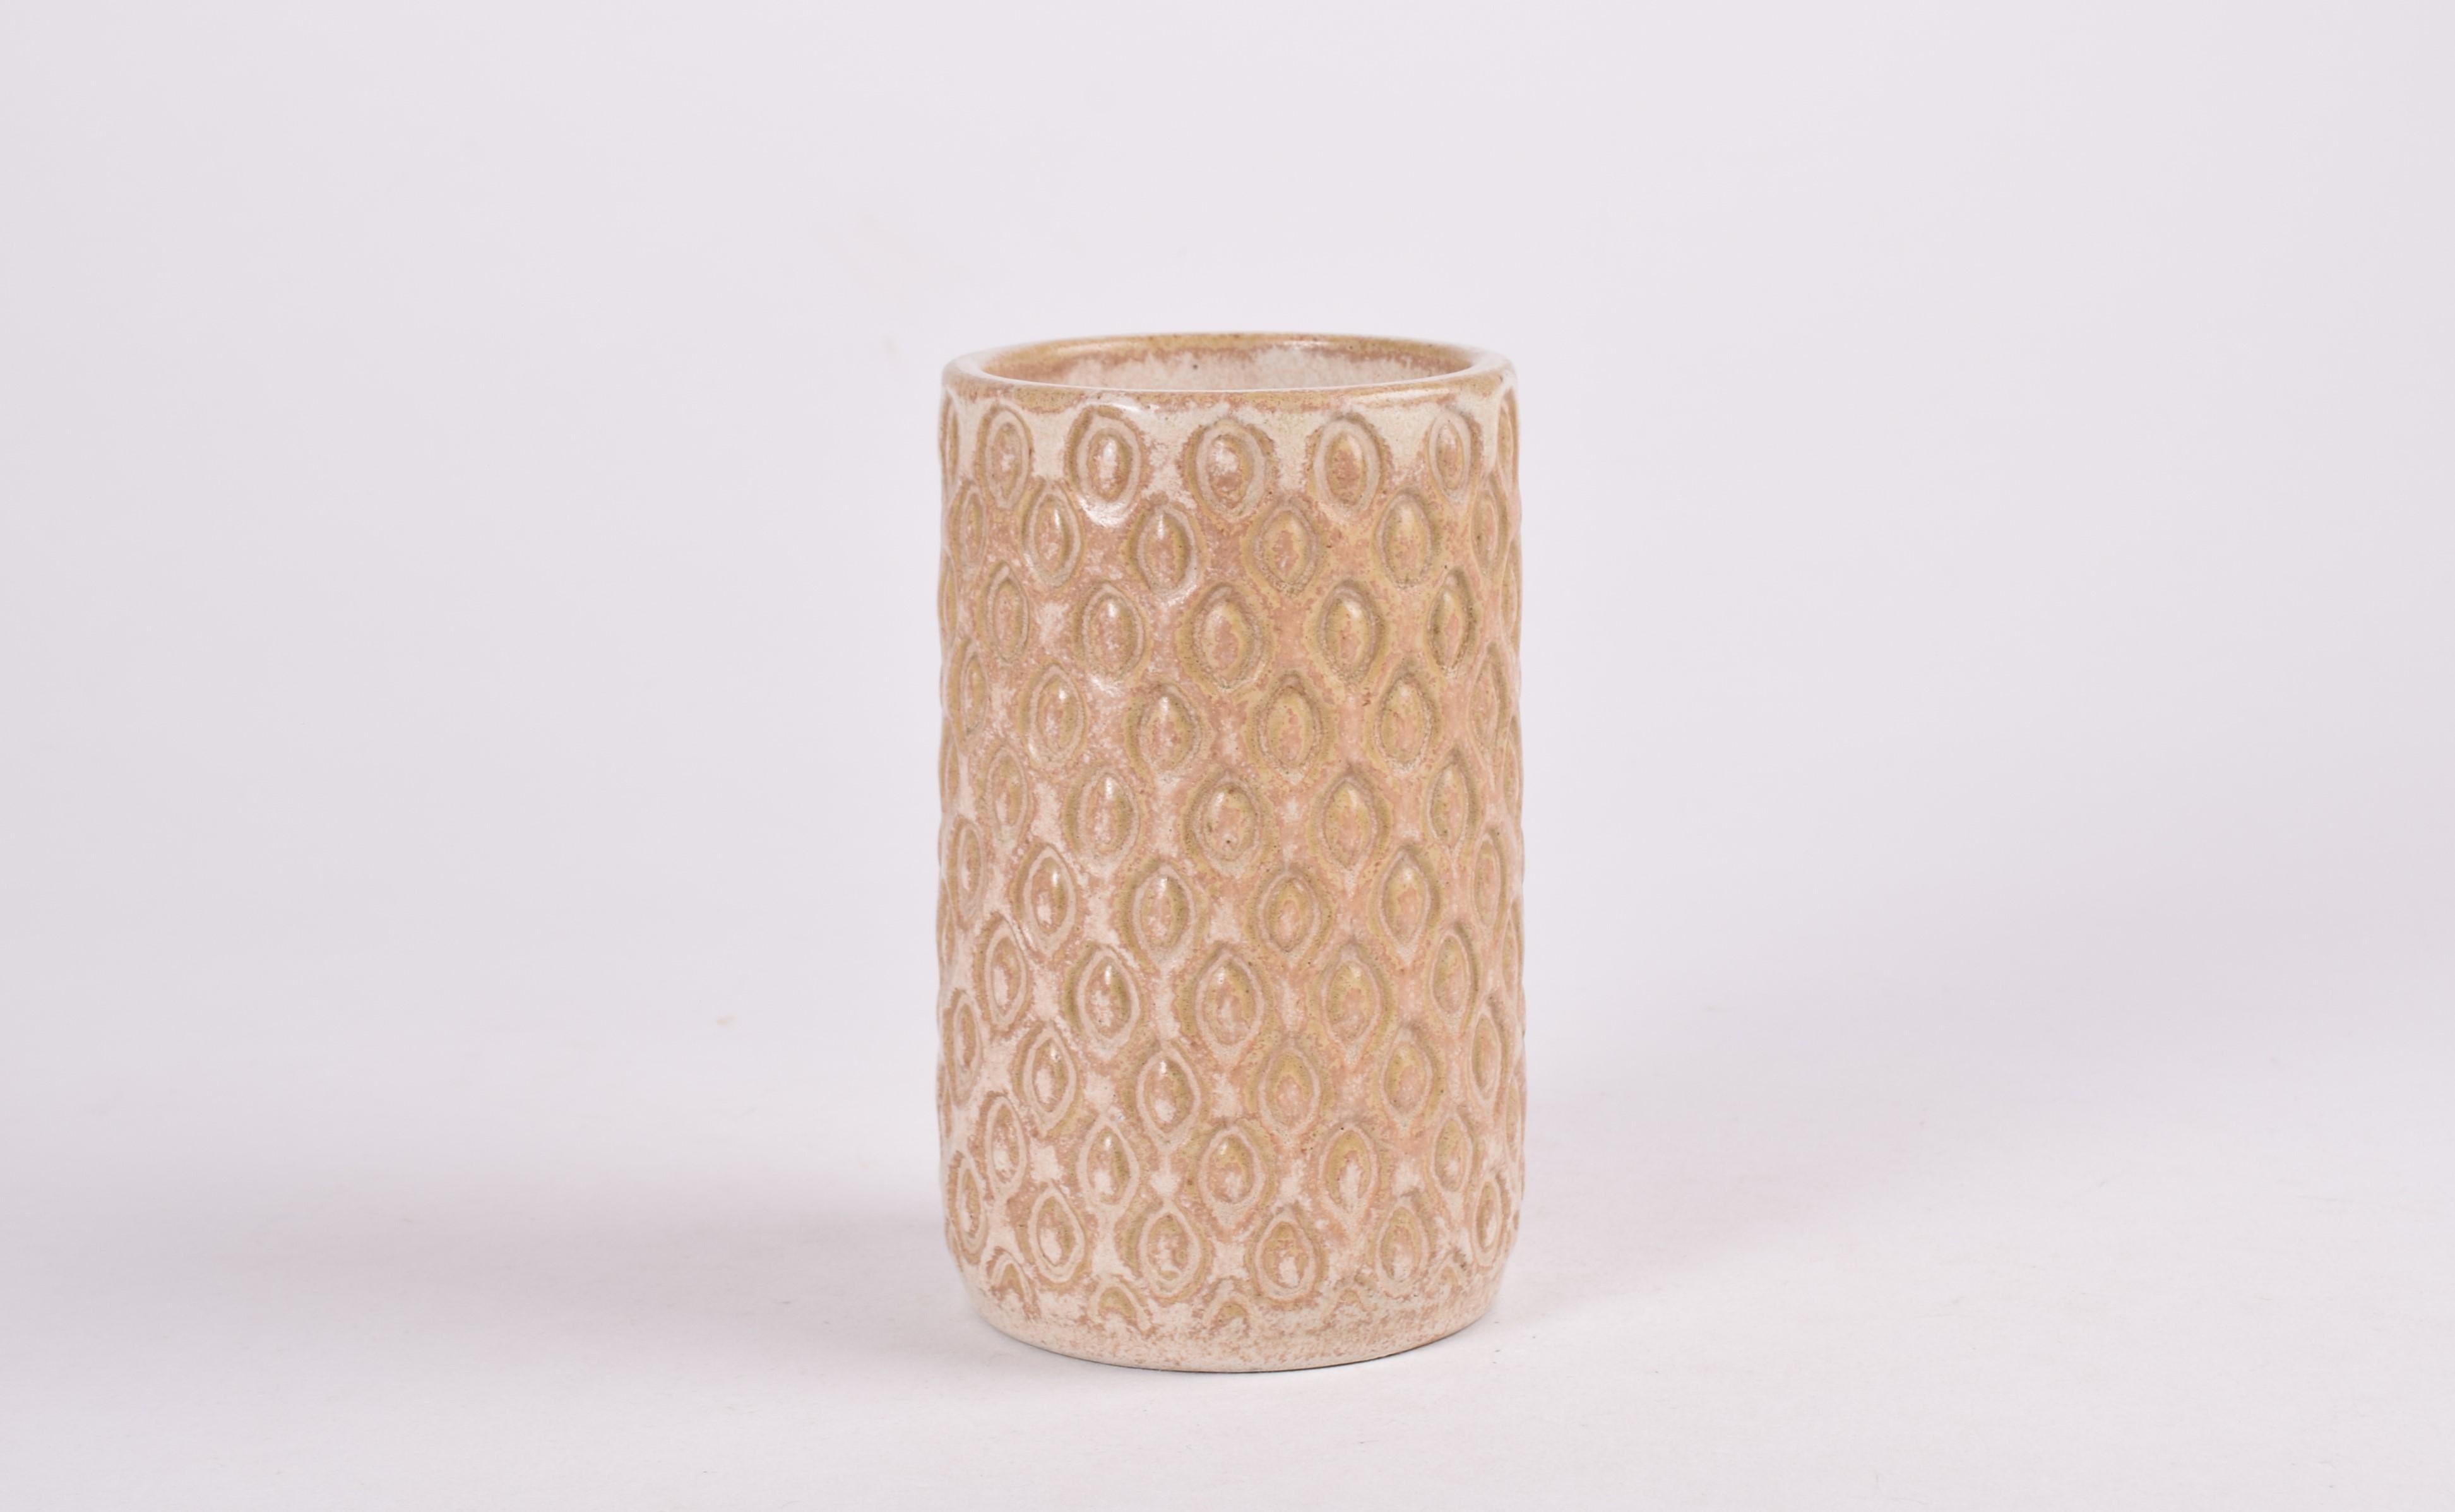 Cylindrical ceramic vase in budding style by Eva Sjögren for the Danish ceramic studio L. Hjorth. Made ca 1940s-60s.

It has a beautiful speckled glaze in sand color which adds extra vividness to the already structured surface. Very tactile.

Fully